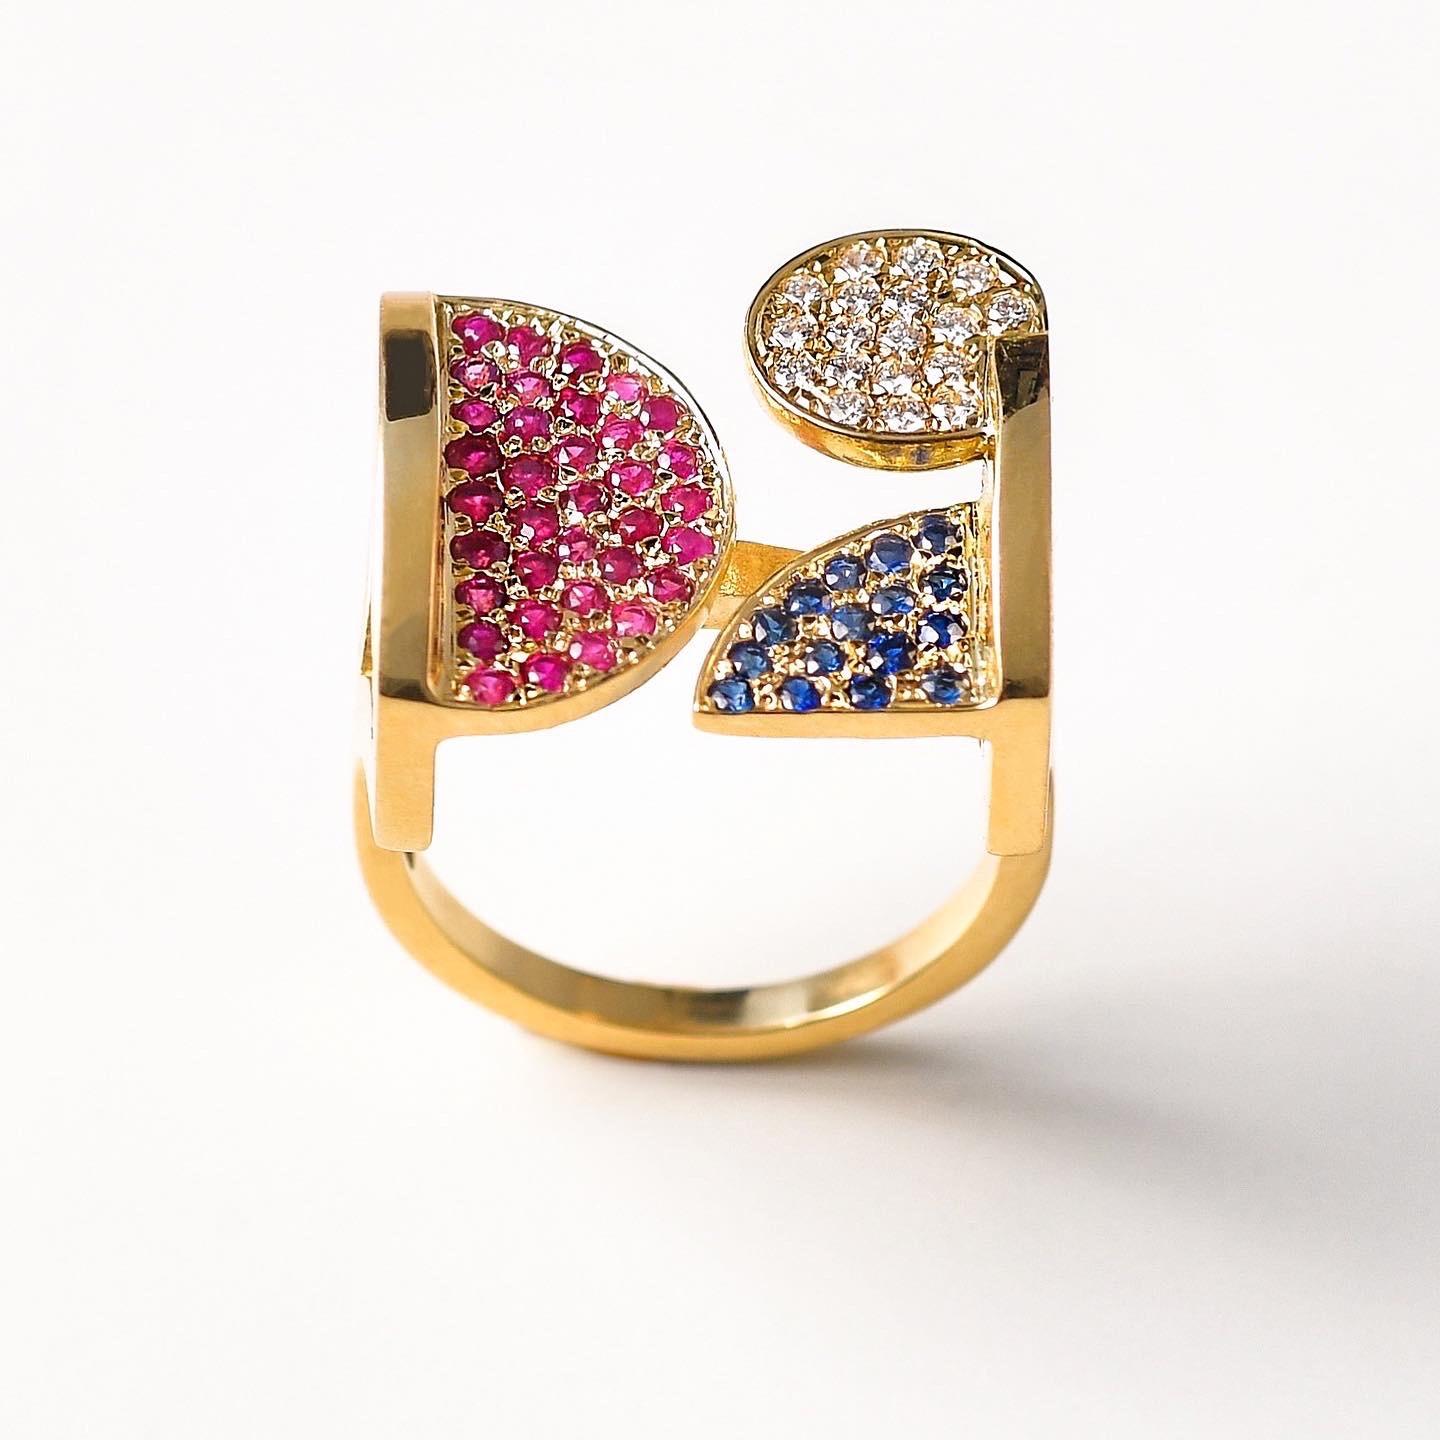 The 'Square’, ring is crafted in 18k gold, hallmarked in Cyprus. This impressive contemporary cocktail ring, comes in a highly polished finish set with  White, VS Diamonds, 0,18 Cts, Rubies 0,45 cts and  Blue Sapphires 0,20 Cts. The 'Square’ ring is